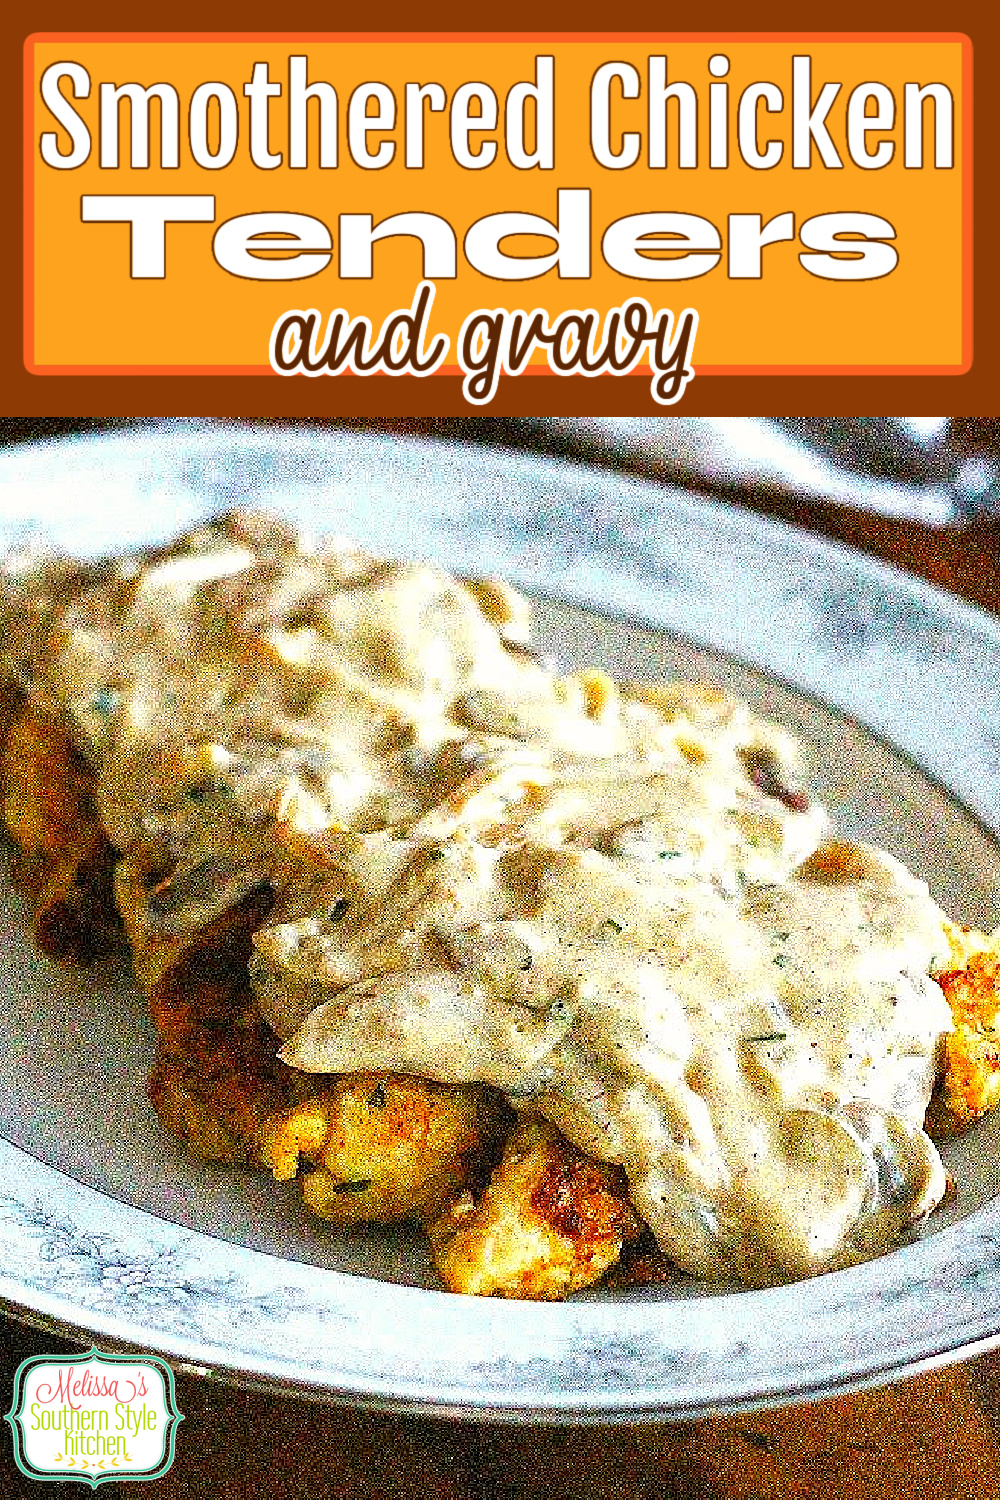 This easy Smothered Chicken Tenders and Pan Gravy can be ready and on the table in under 30 minutes #chicken #chickenrecipes #chickentenders #friedchicken #gravy #smotheredchicken #food #recipes #friedchickentenders #southernfood #southernrecipes via @melissasssk